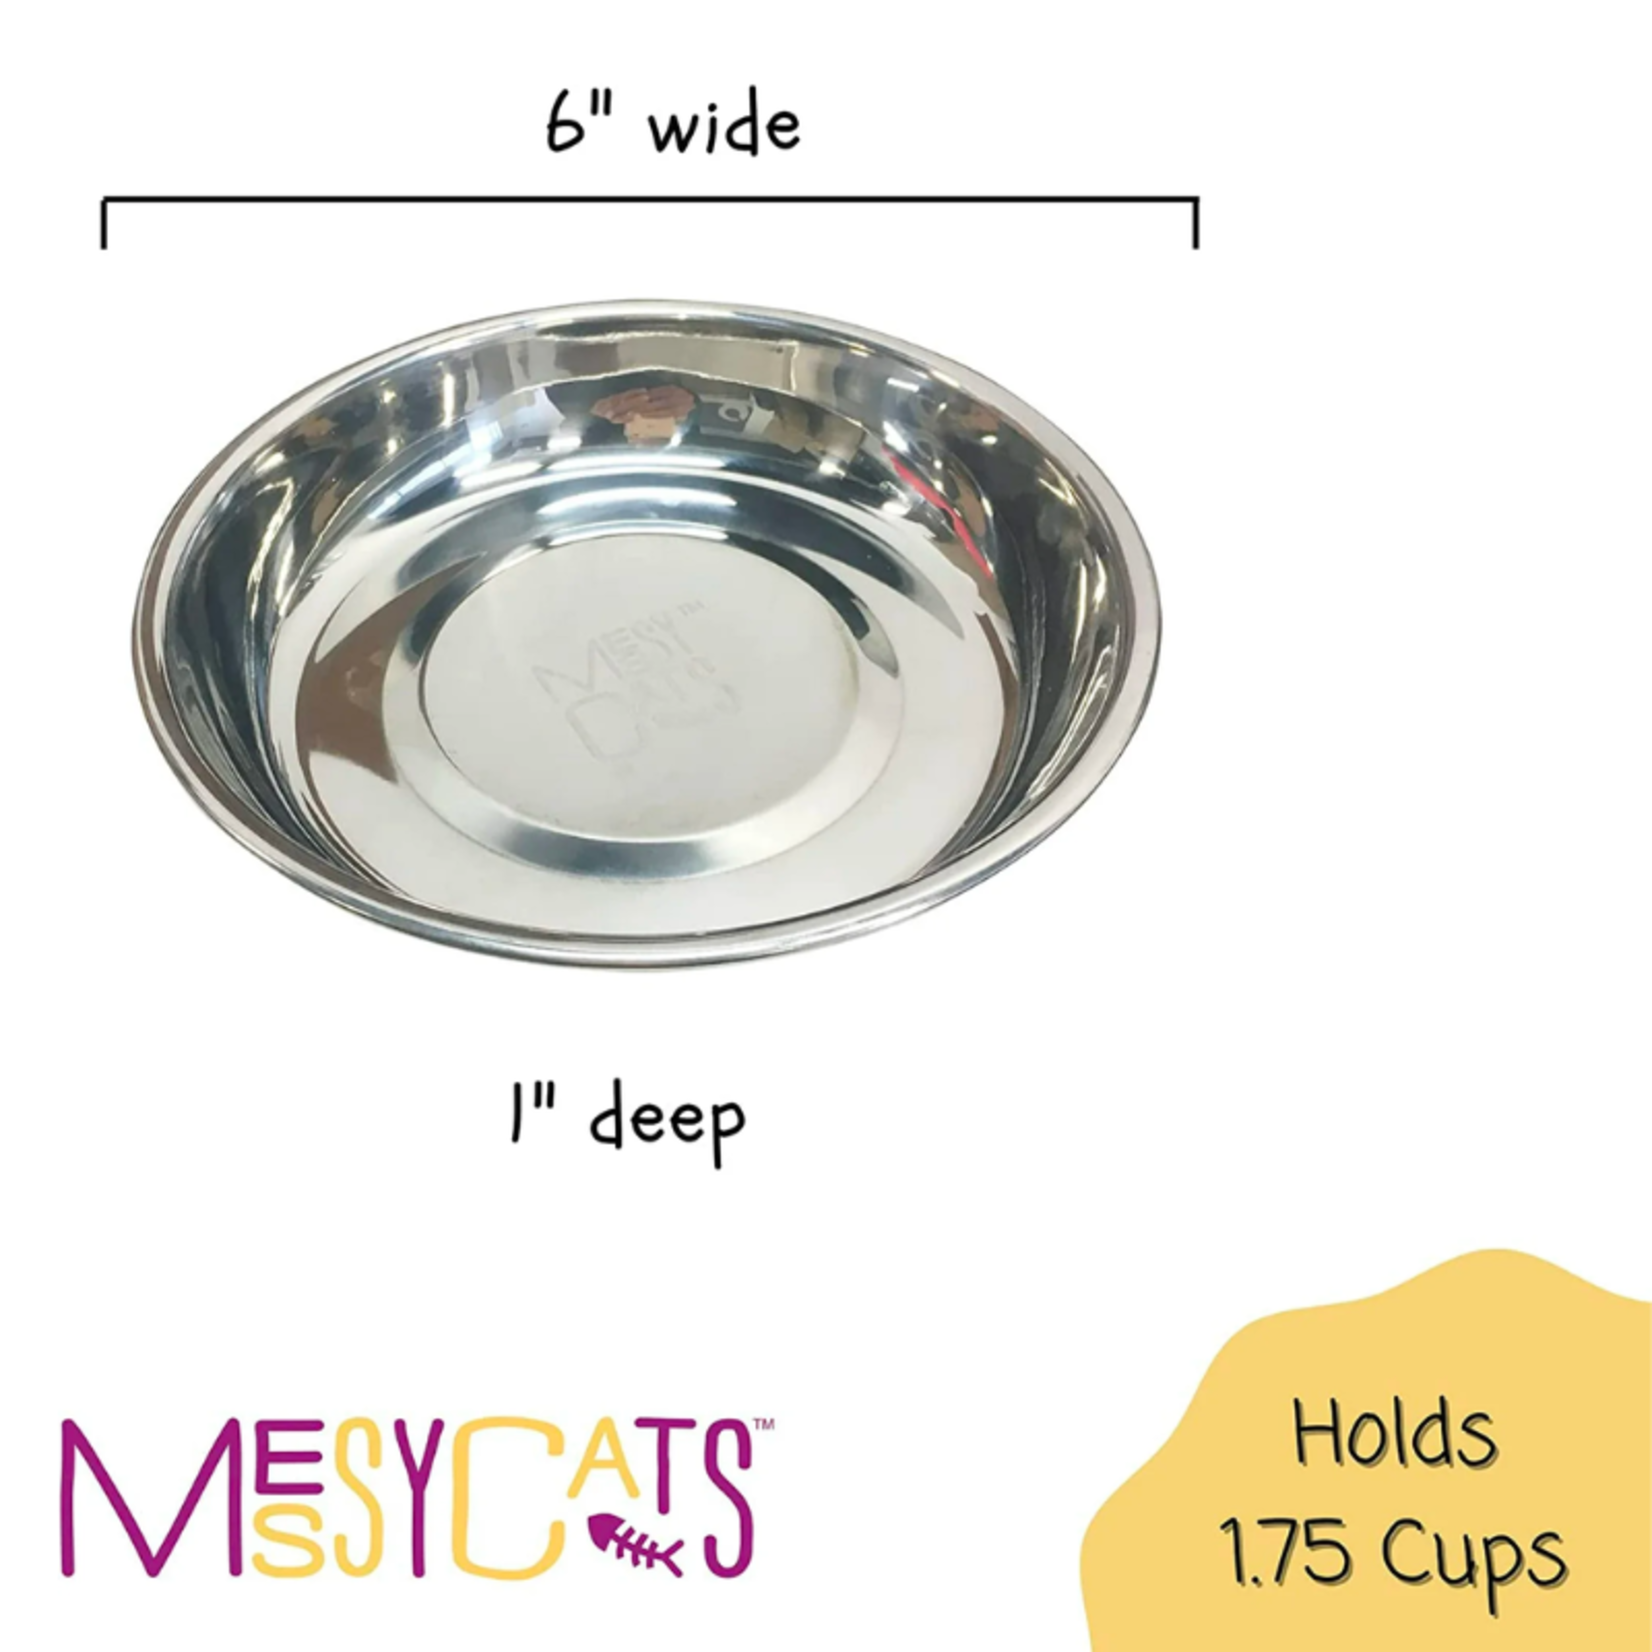 Messy Mutts / Messy Cats 14 oz. - Stainless Steel Bowl for Cats - Messy Mutts / Messy Cats